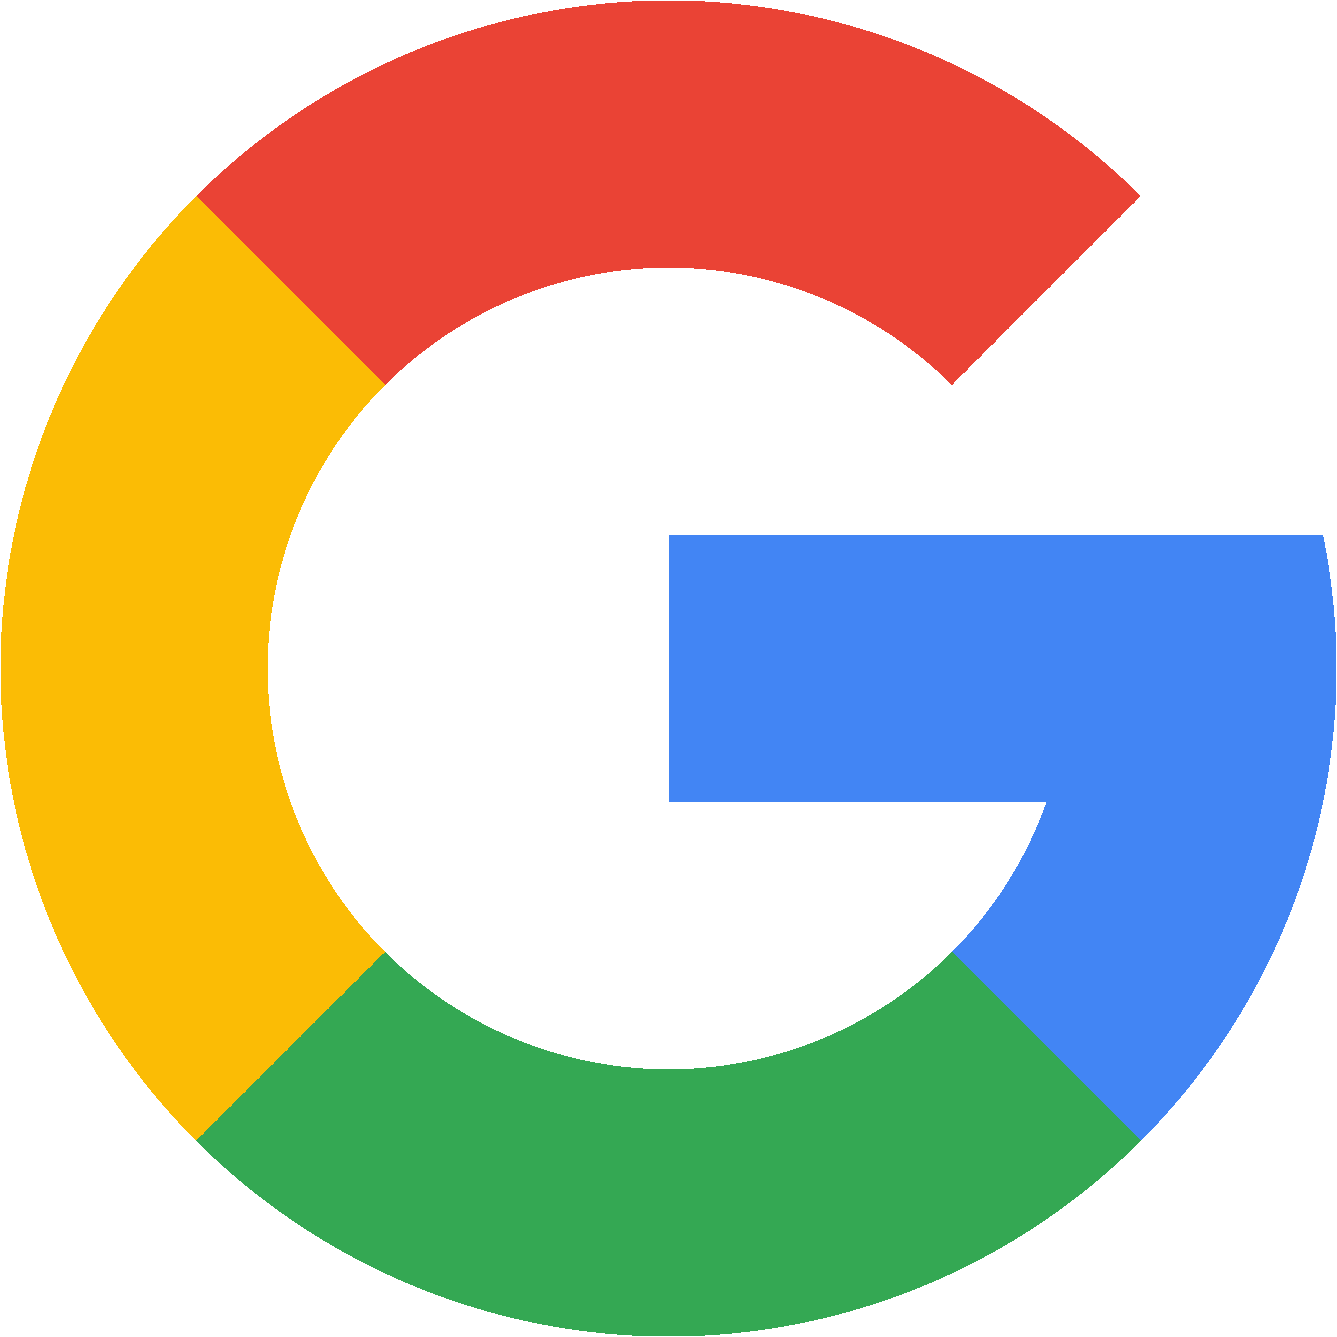 Google G Logo - code golf Your Google Overlords: Draw the G Logo